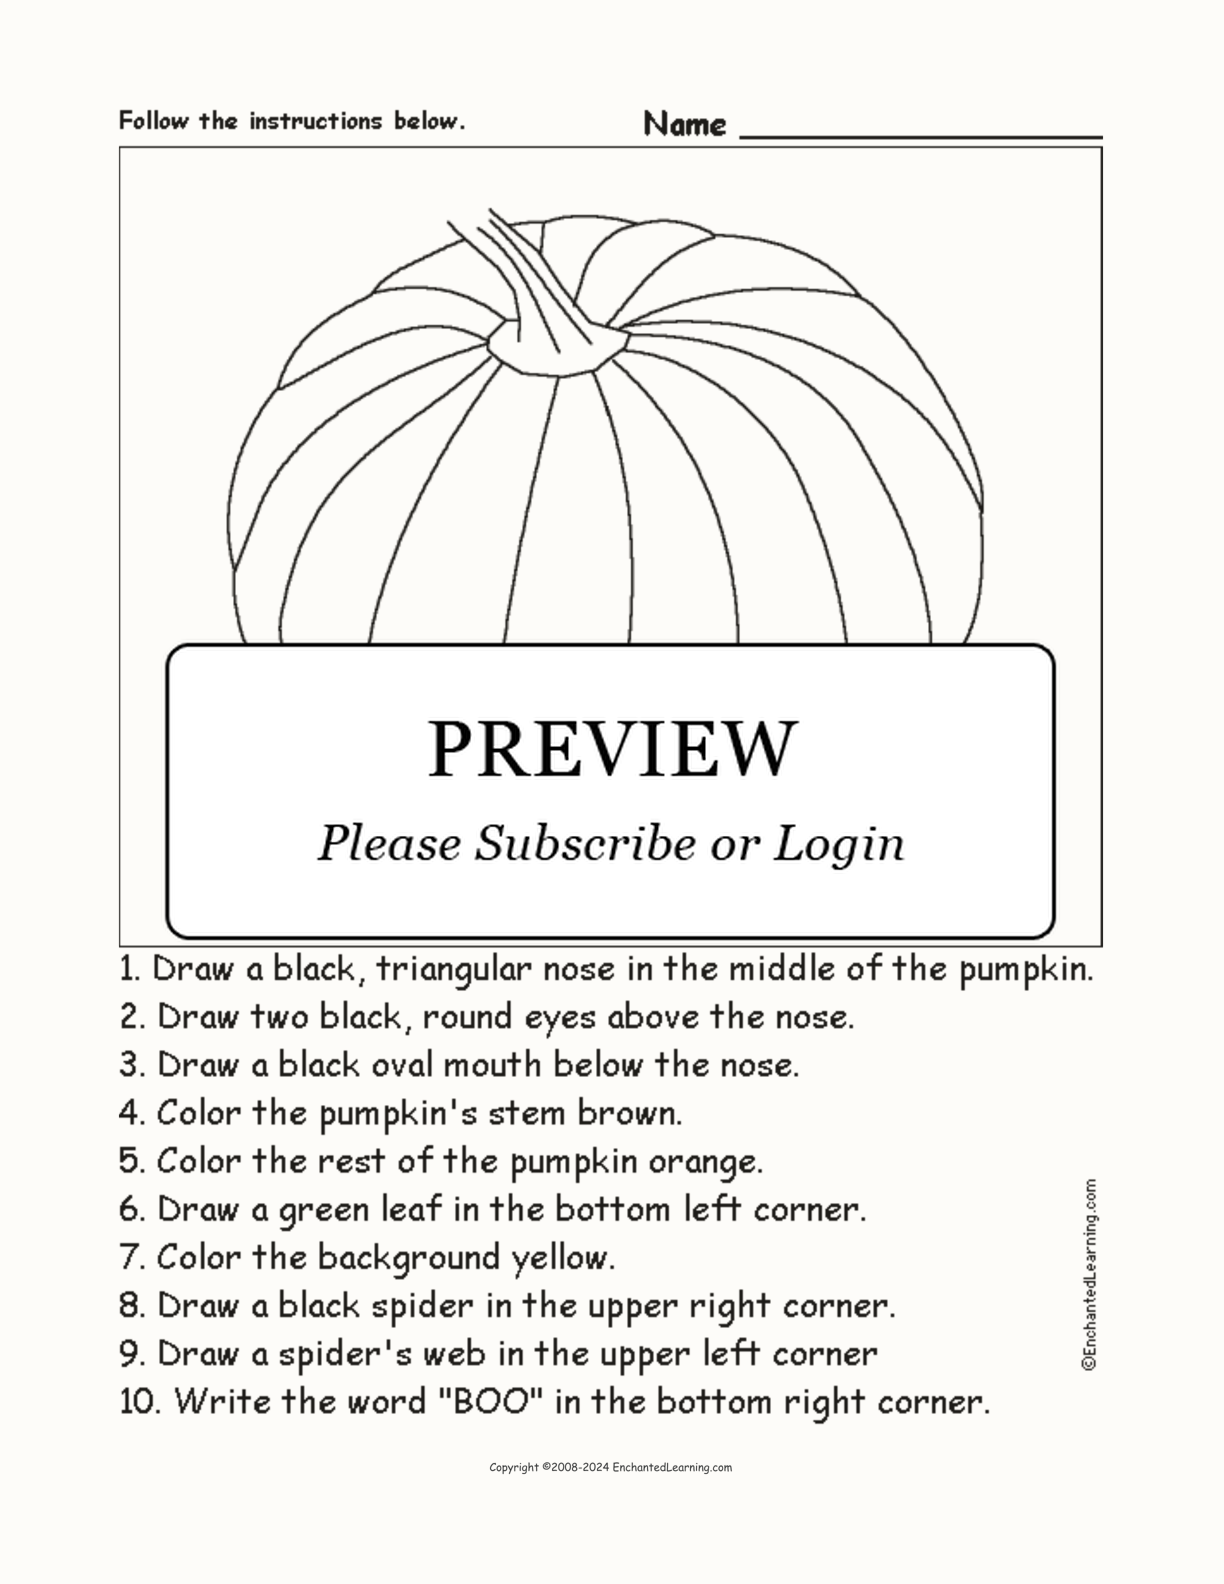 Jack-o'-Lantern Follow the Instructions interactive worksheet page 1